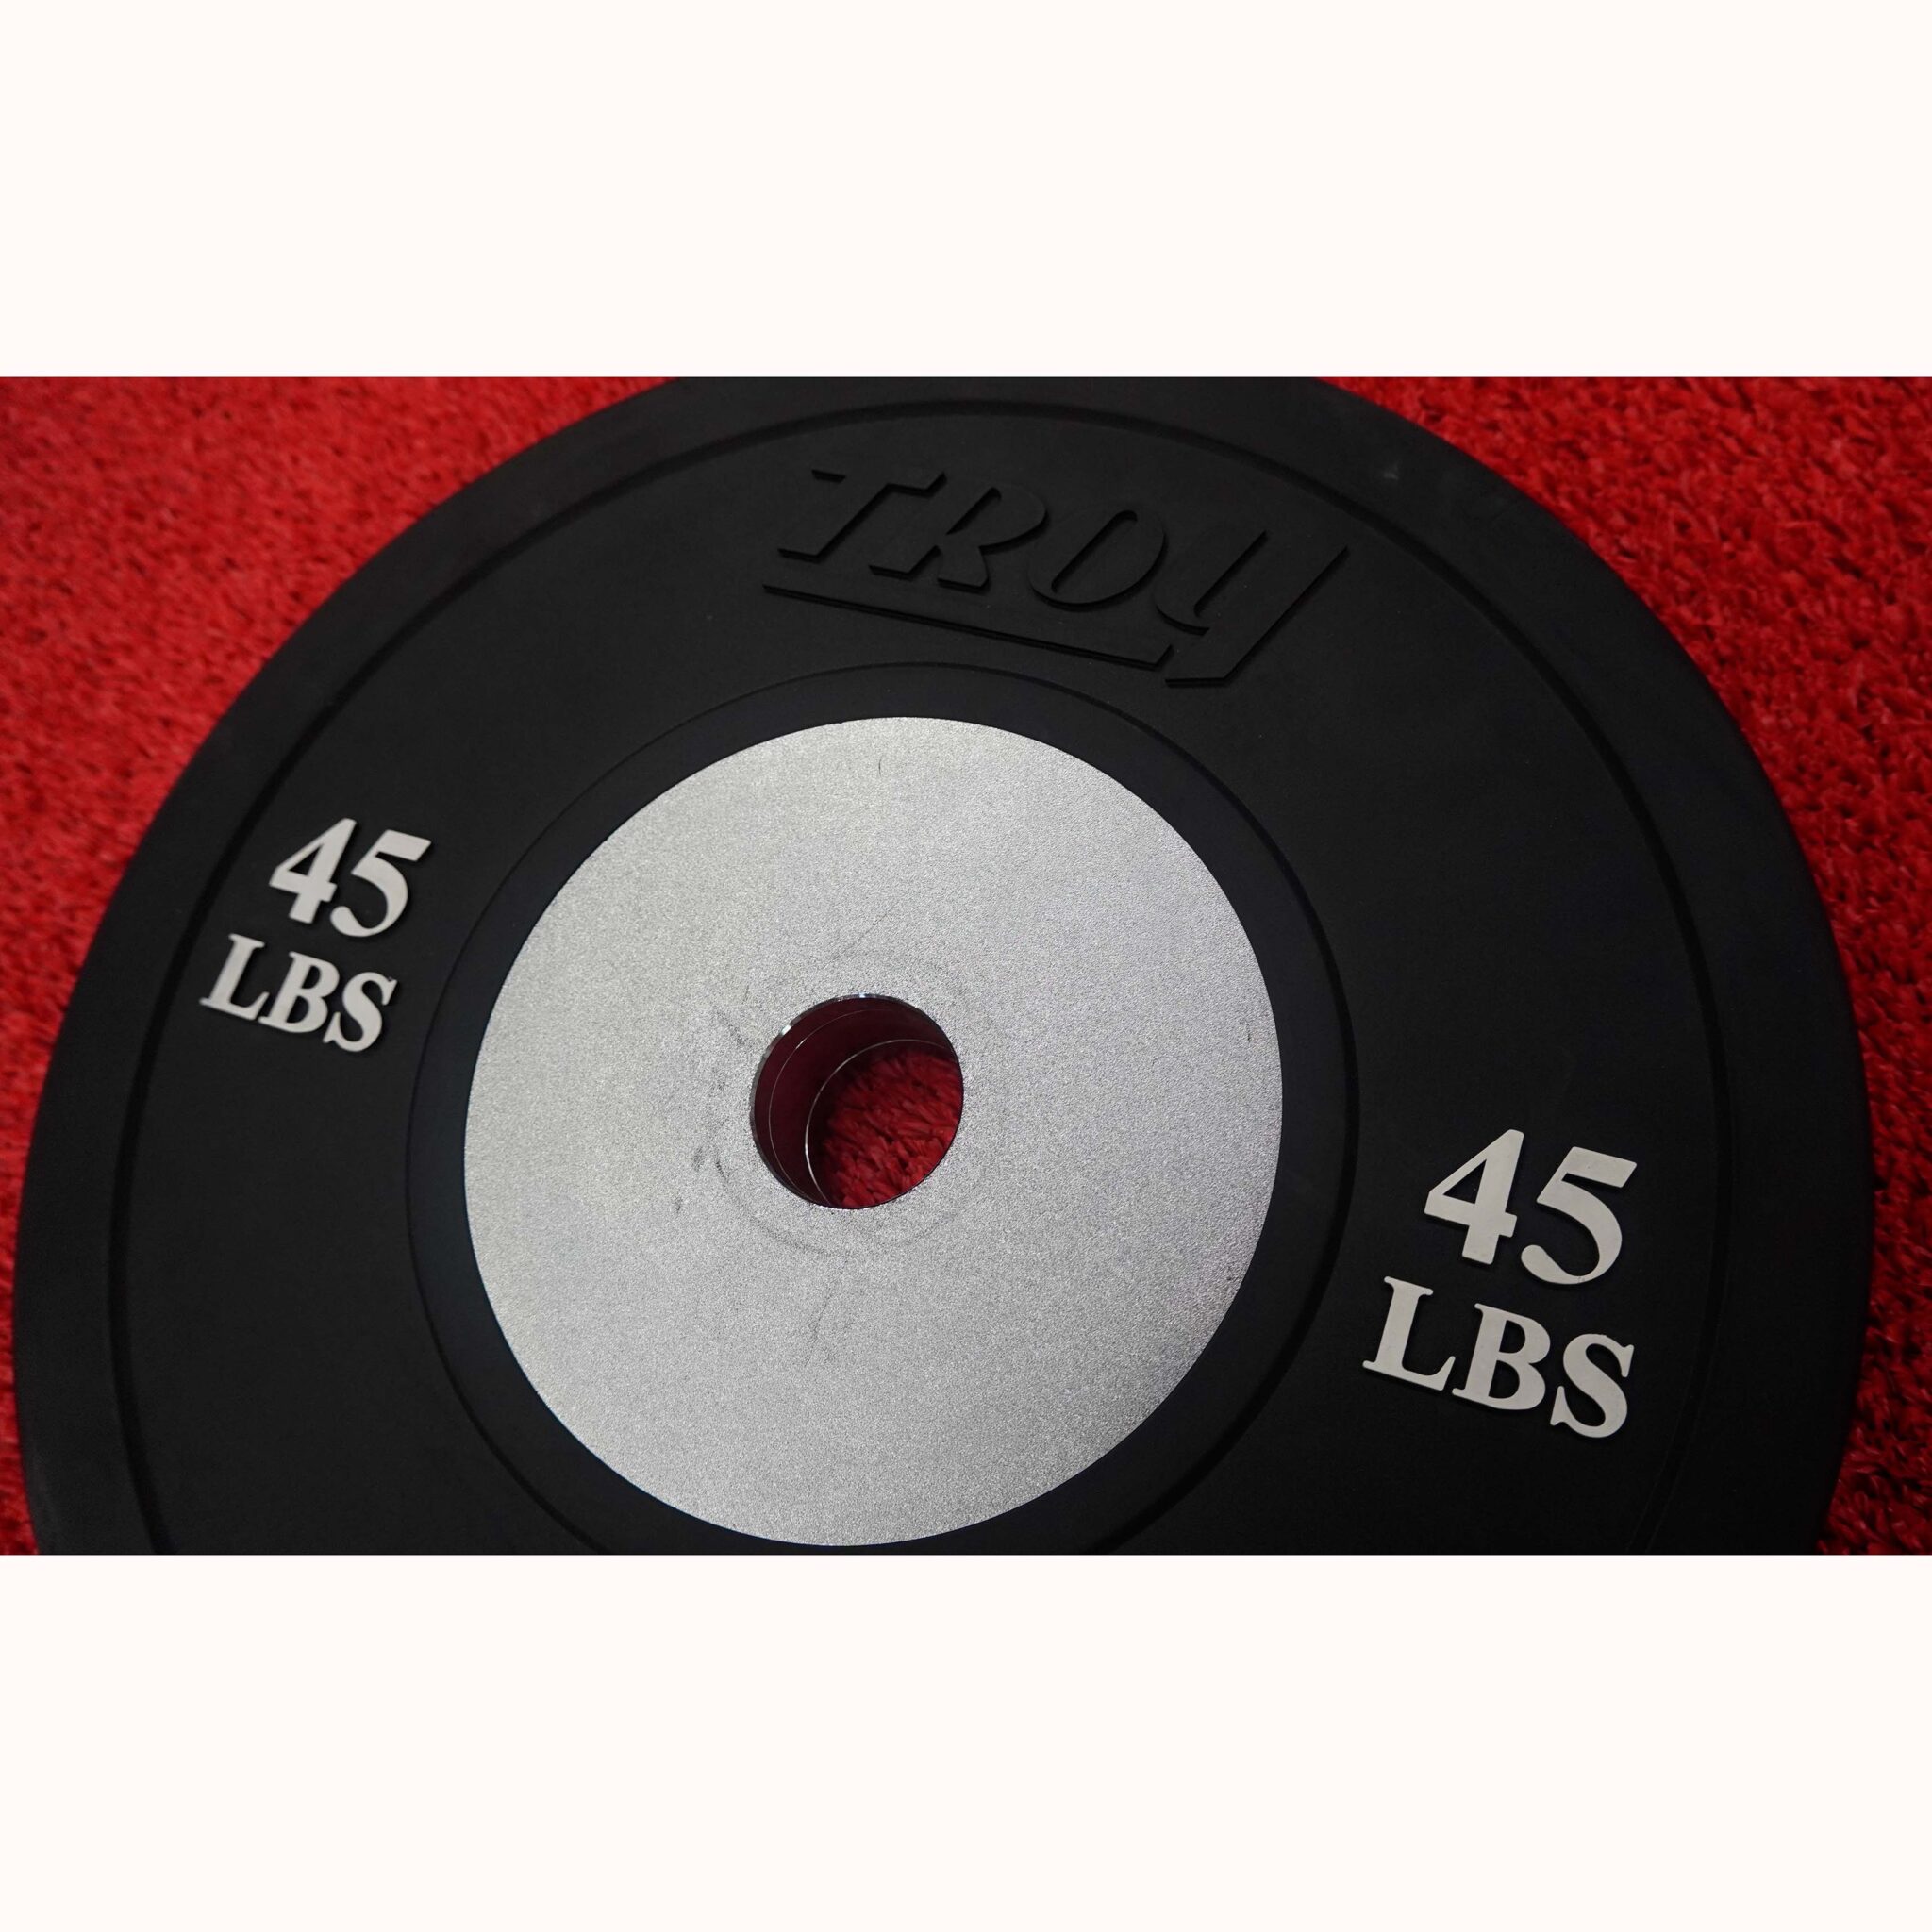 Troy Competition Bumper Plates